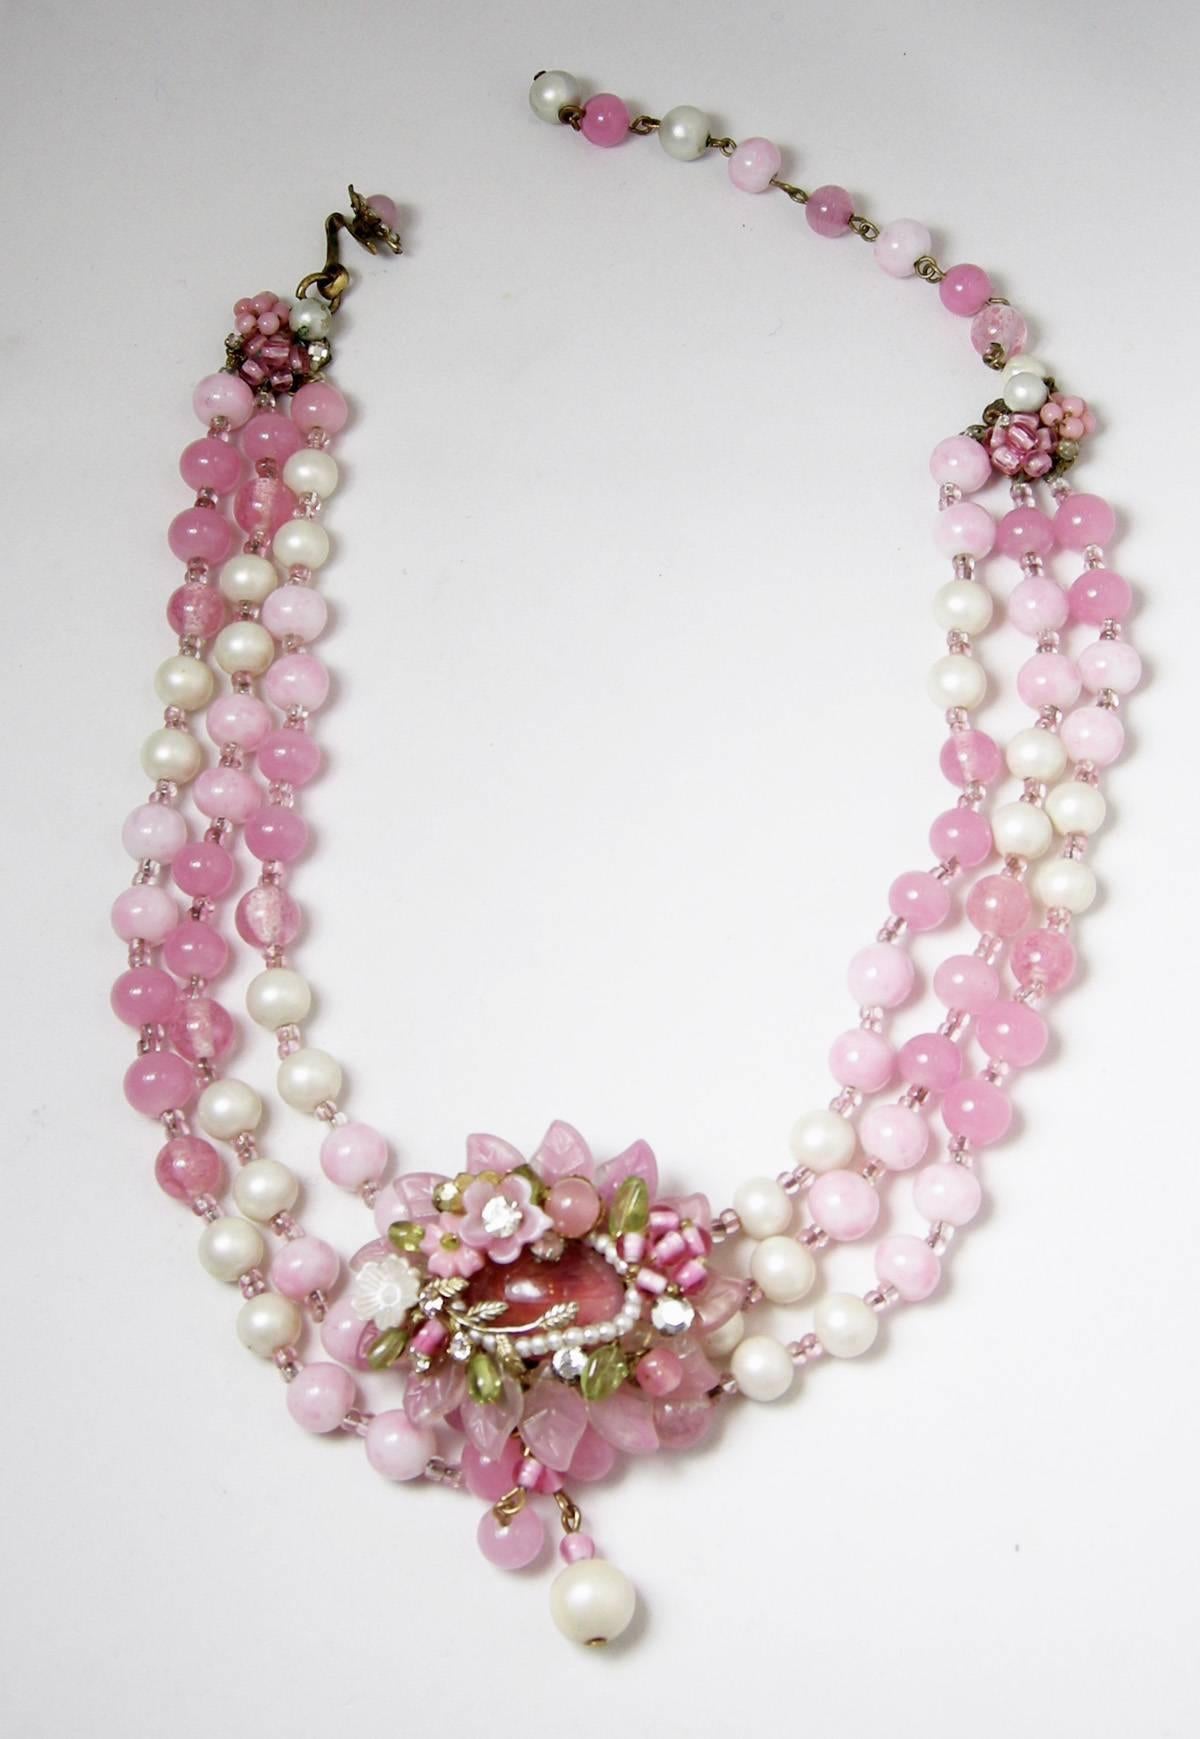 This beautiful 1950s Miriam Haskell necklace has 3 rows of pink glass beads and faux pearls leading down to a gorgeous floral centerpiece that overlaps the two bottom rows.  The necklace is 16” long.  The centerpiece is 2” wide and 2-1/2” long, with